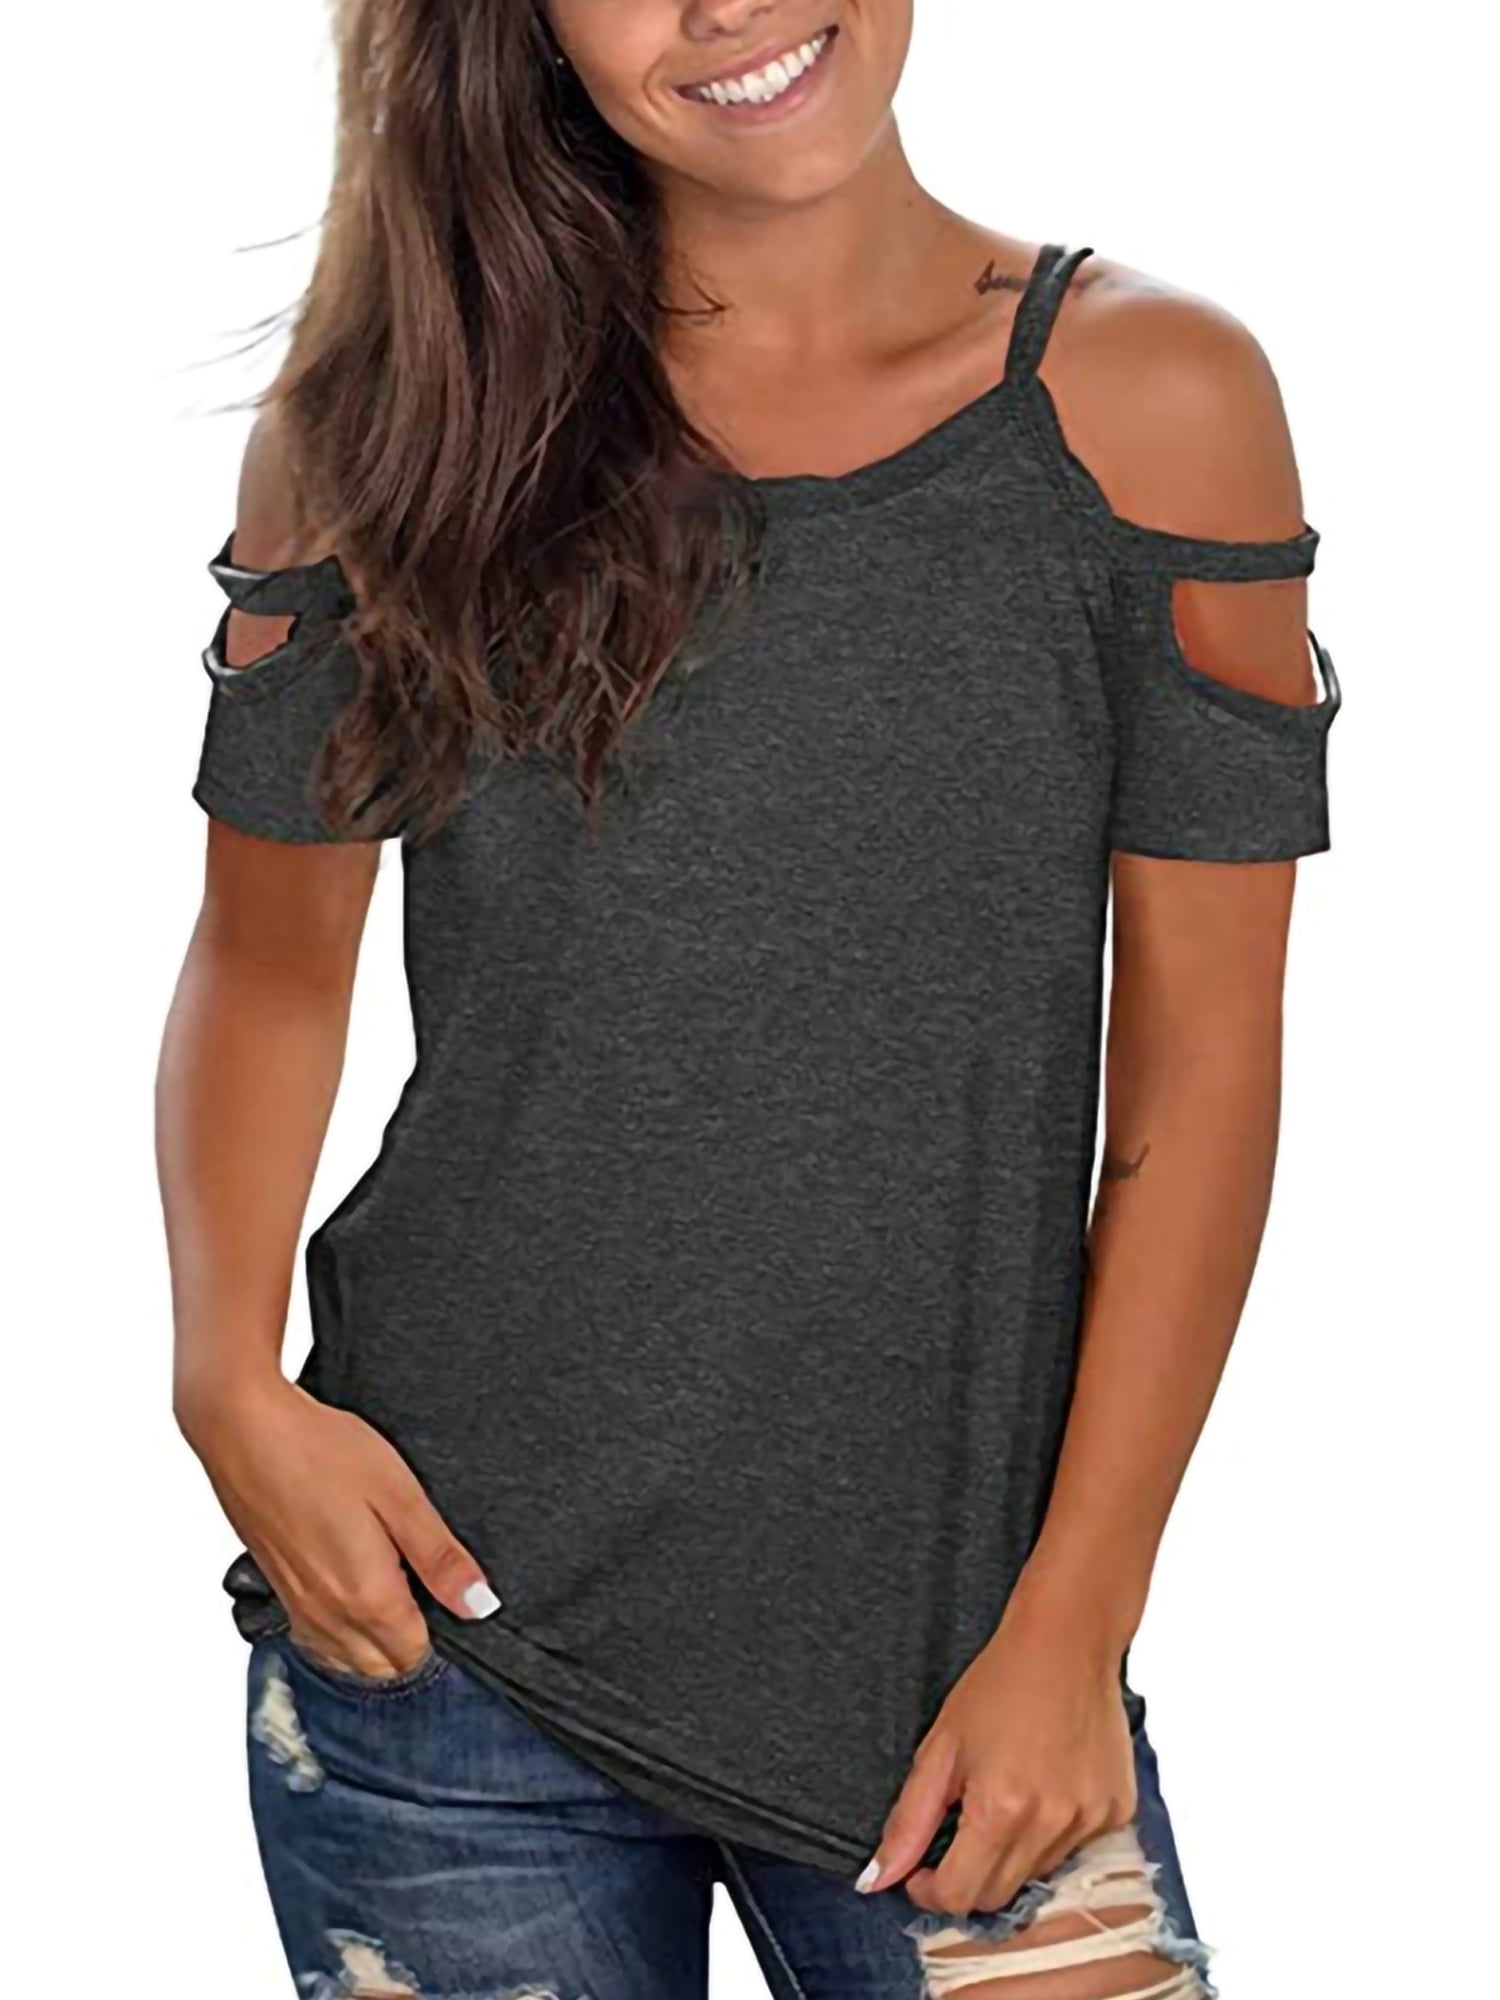 Women's Cold Shoulder Strappy Tunic Tops Loose Zipper V-Neck Tee Summer Casual T-Shirt Fashion Blouses